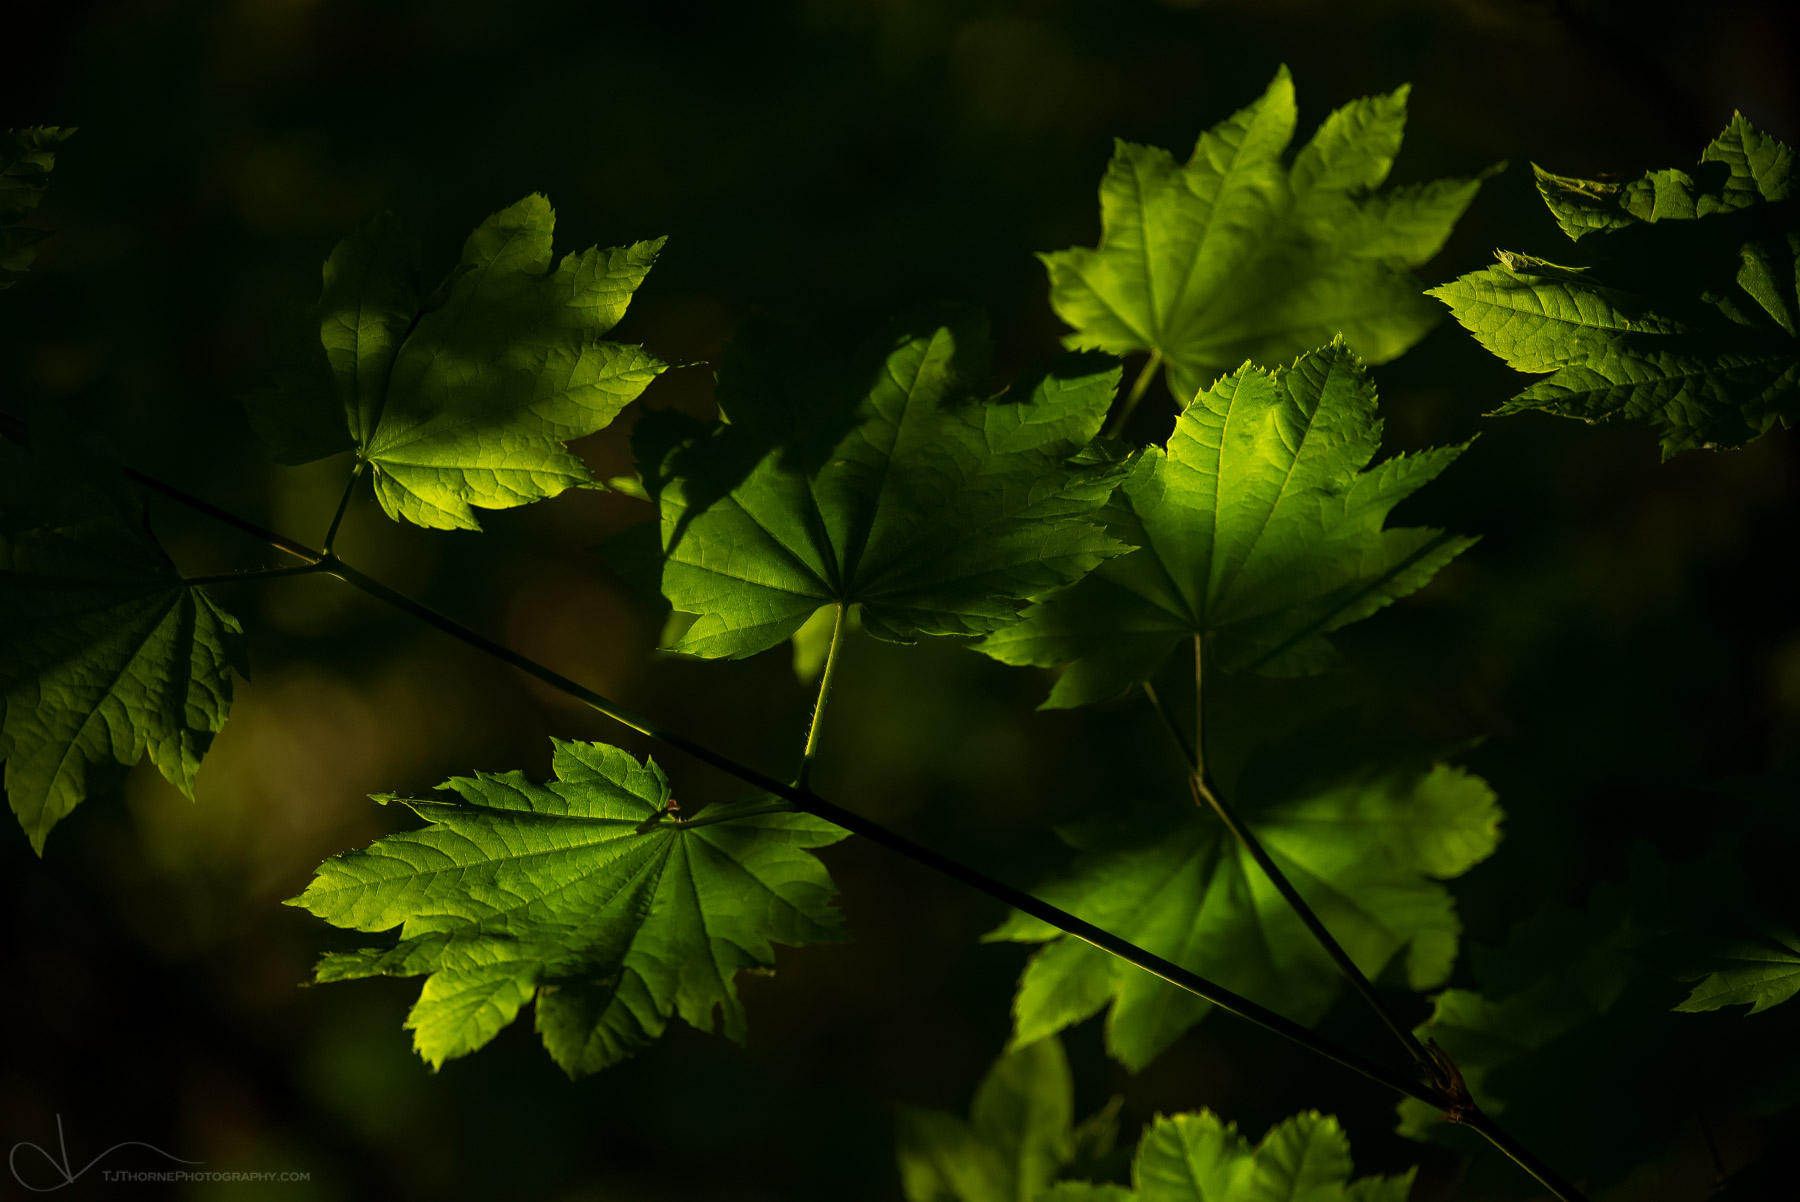 The last touch of evening light gently gracing maple leaves in Olympic National Park, Washington.